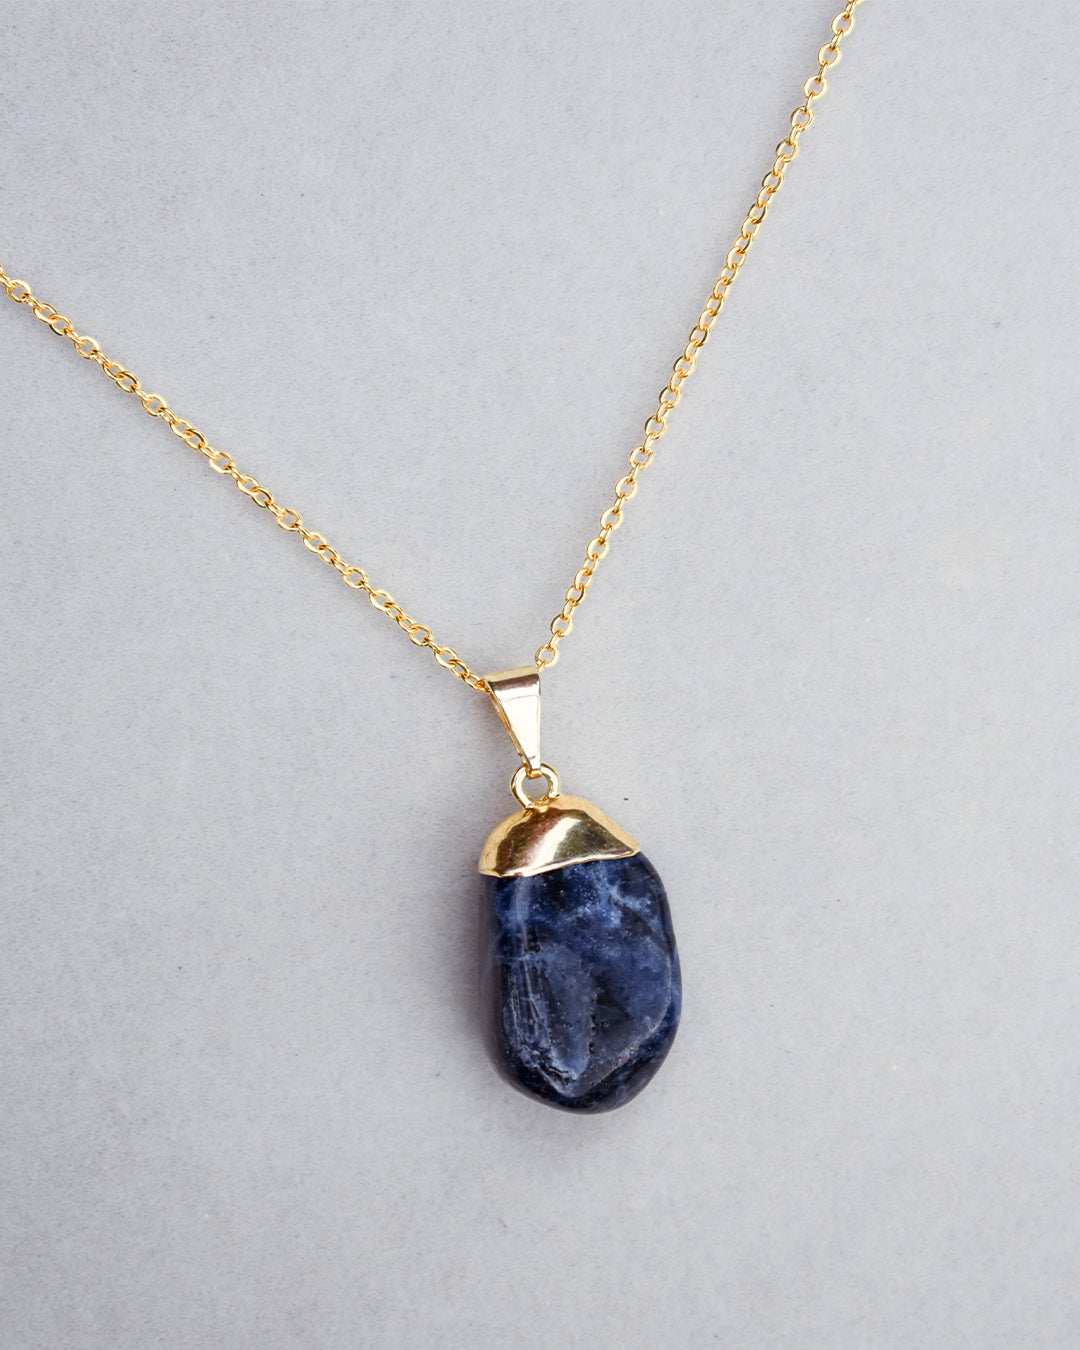 Gold Plated chain with Sodalite crystal pendant